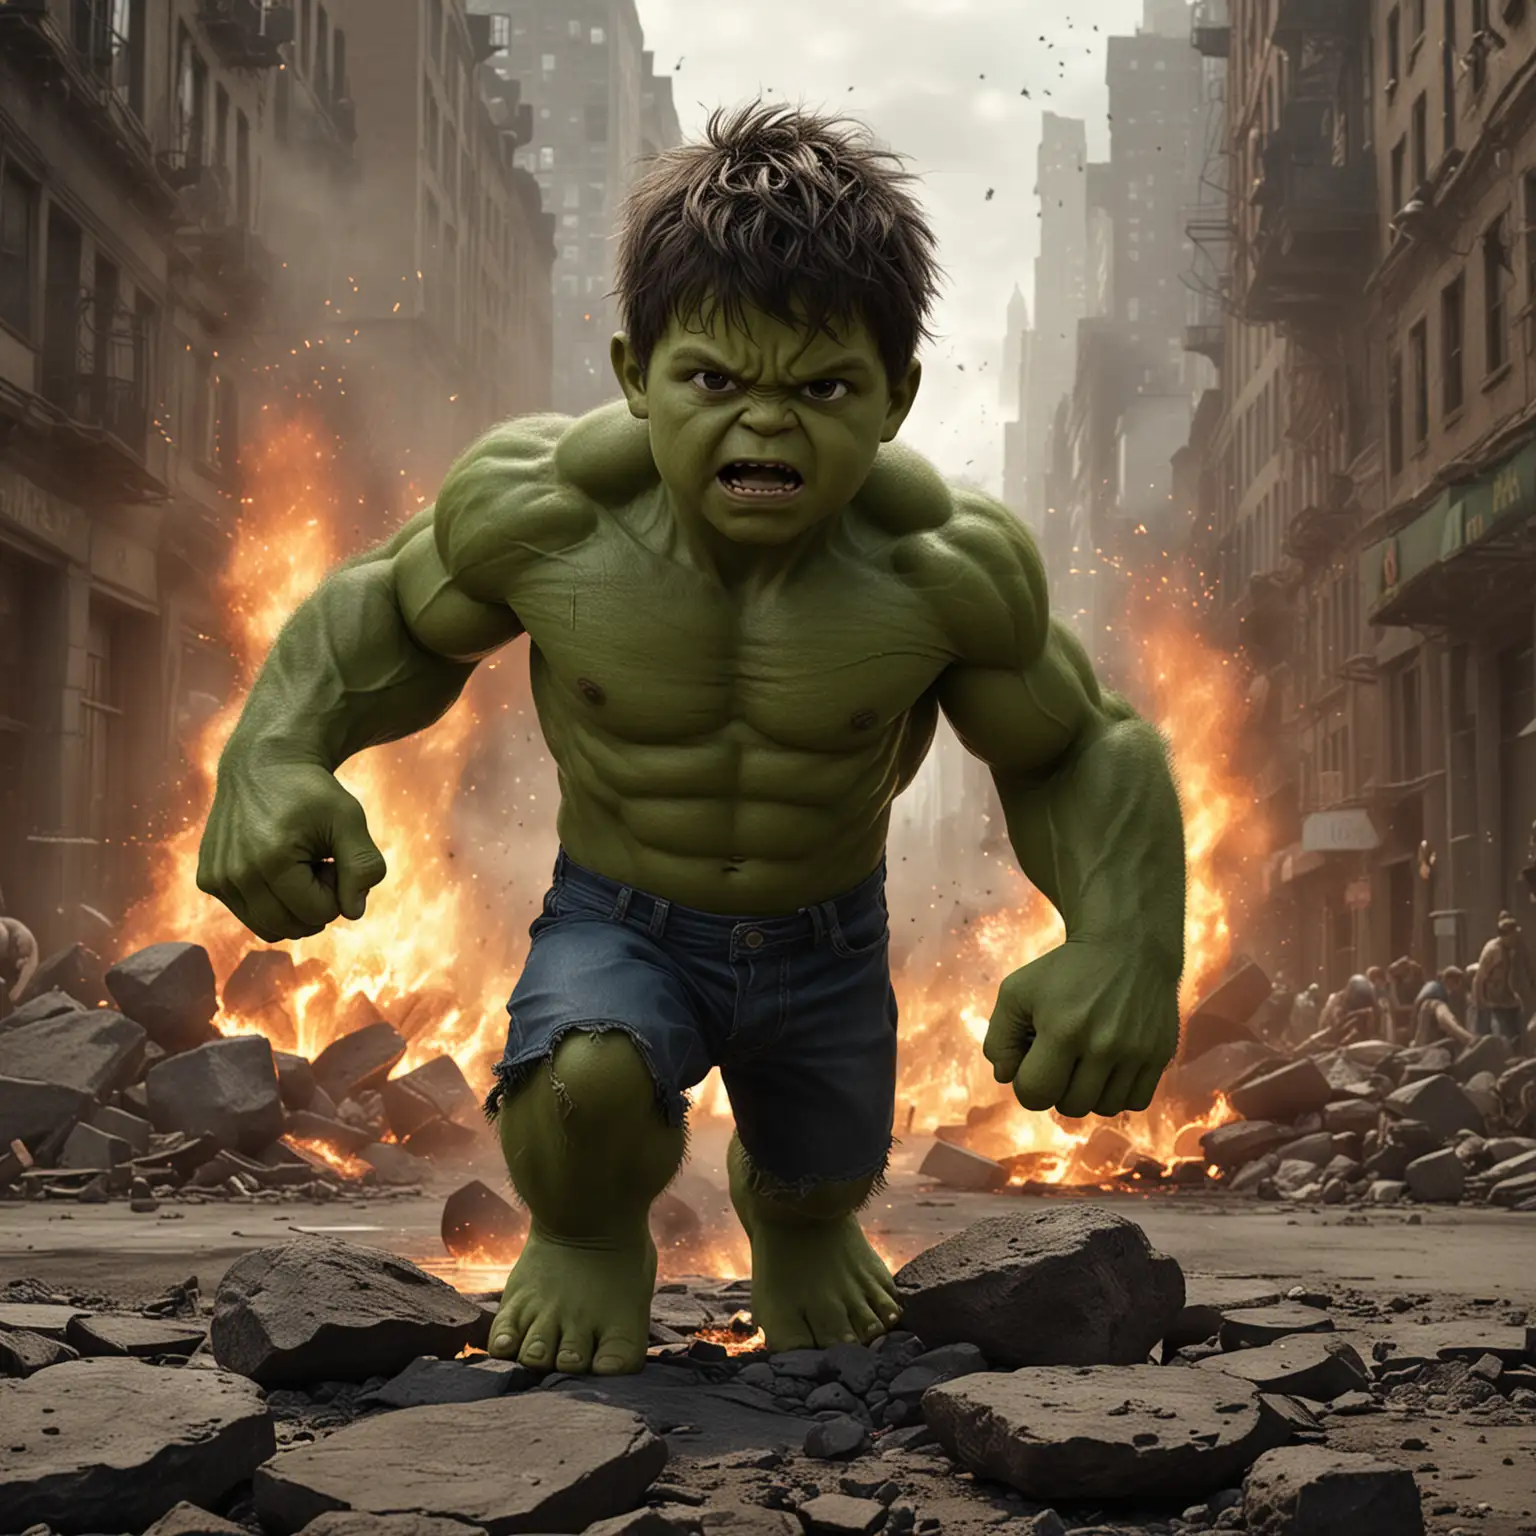 Young Boy Transforms into Hulk in Burning City Scene